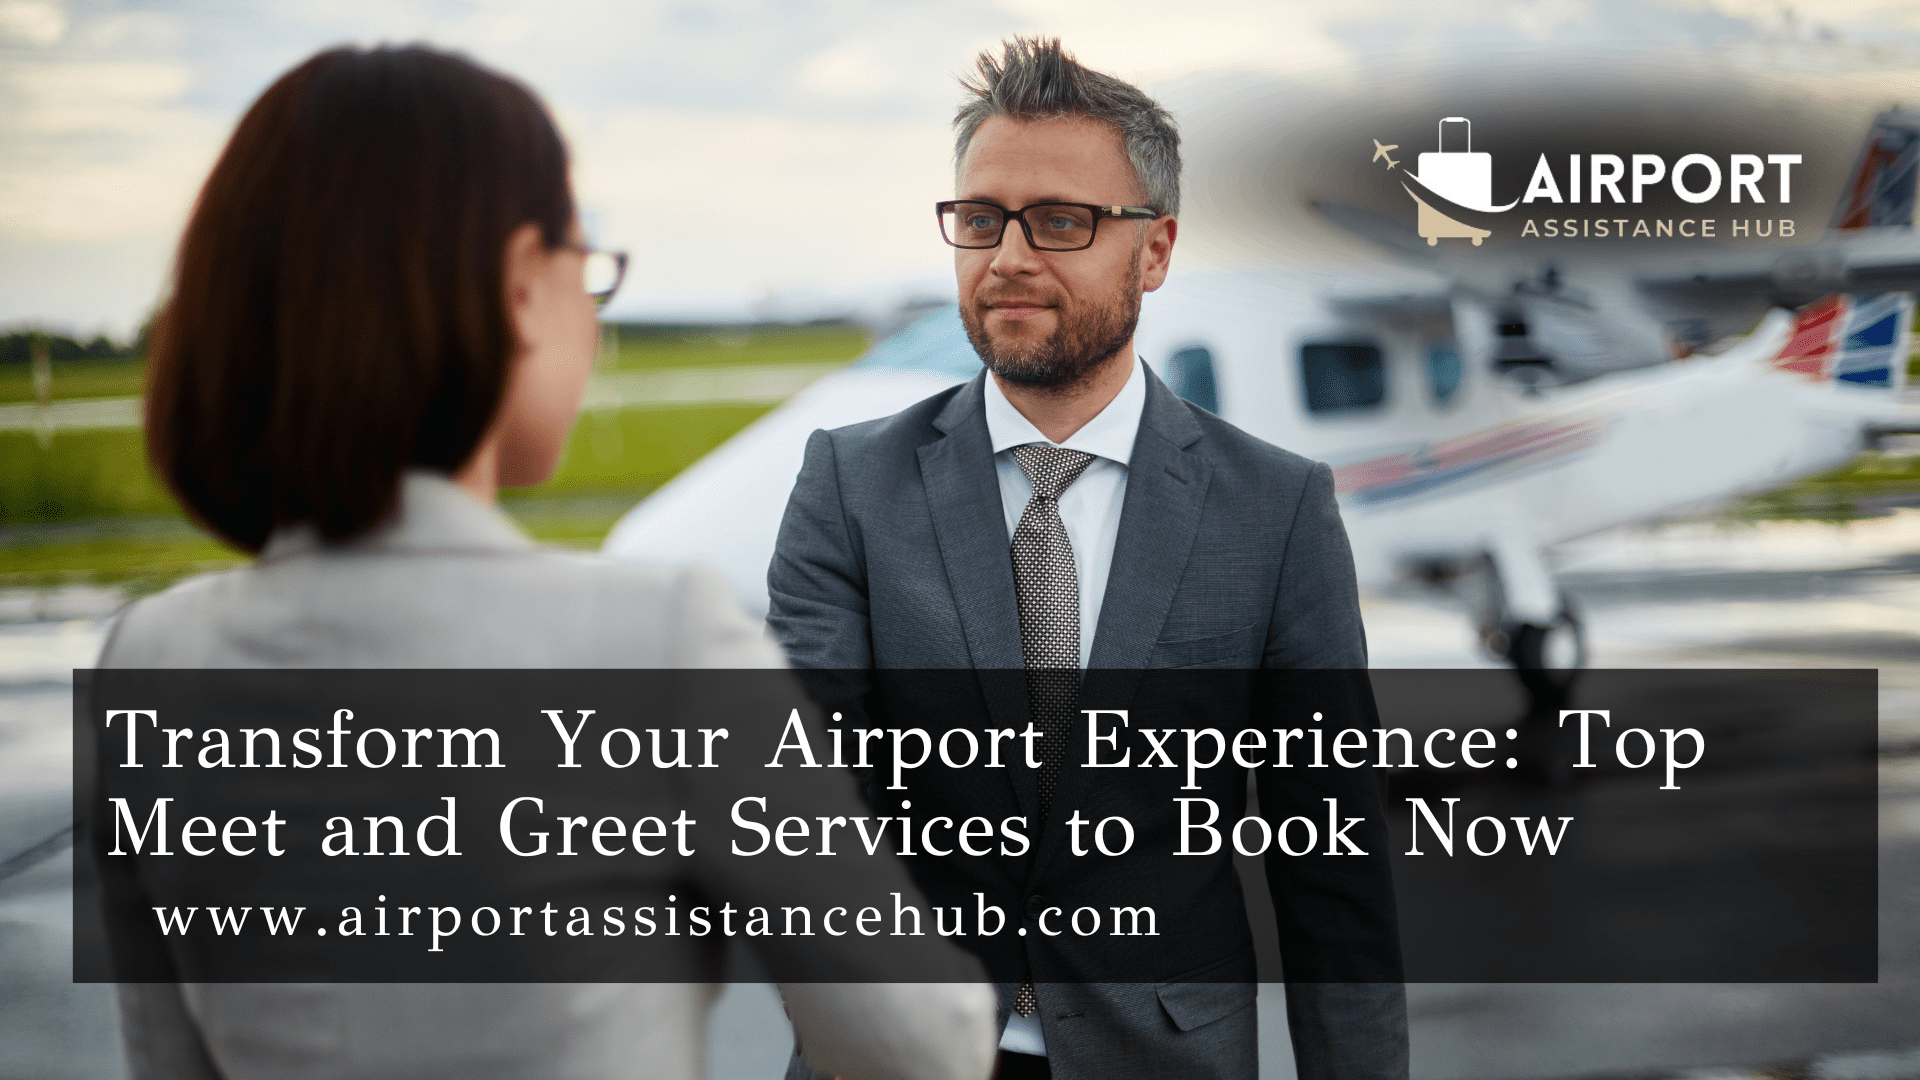 Transform Your Airport Experience: Top Meet and Greet Services to Book Now